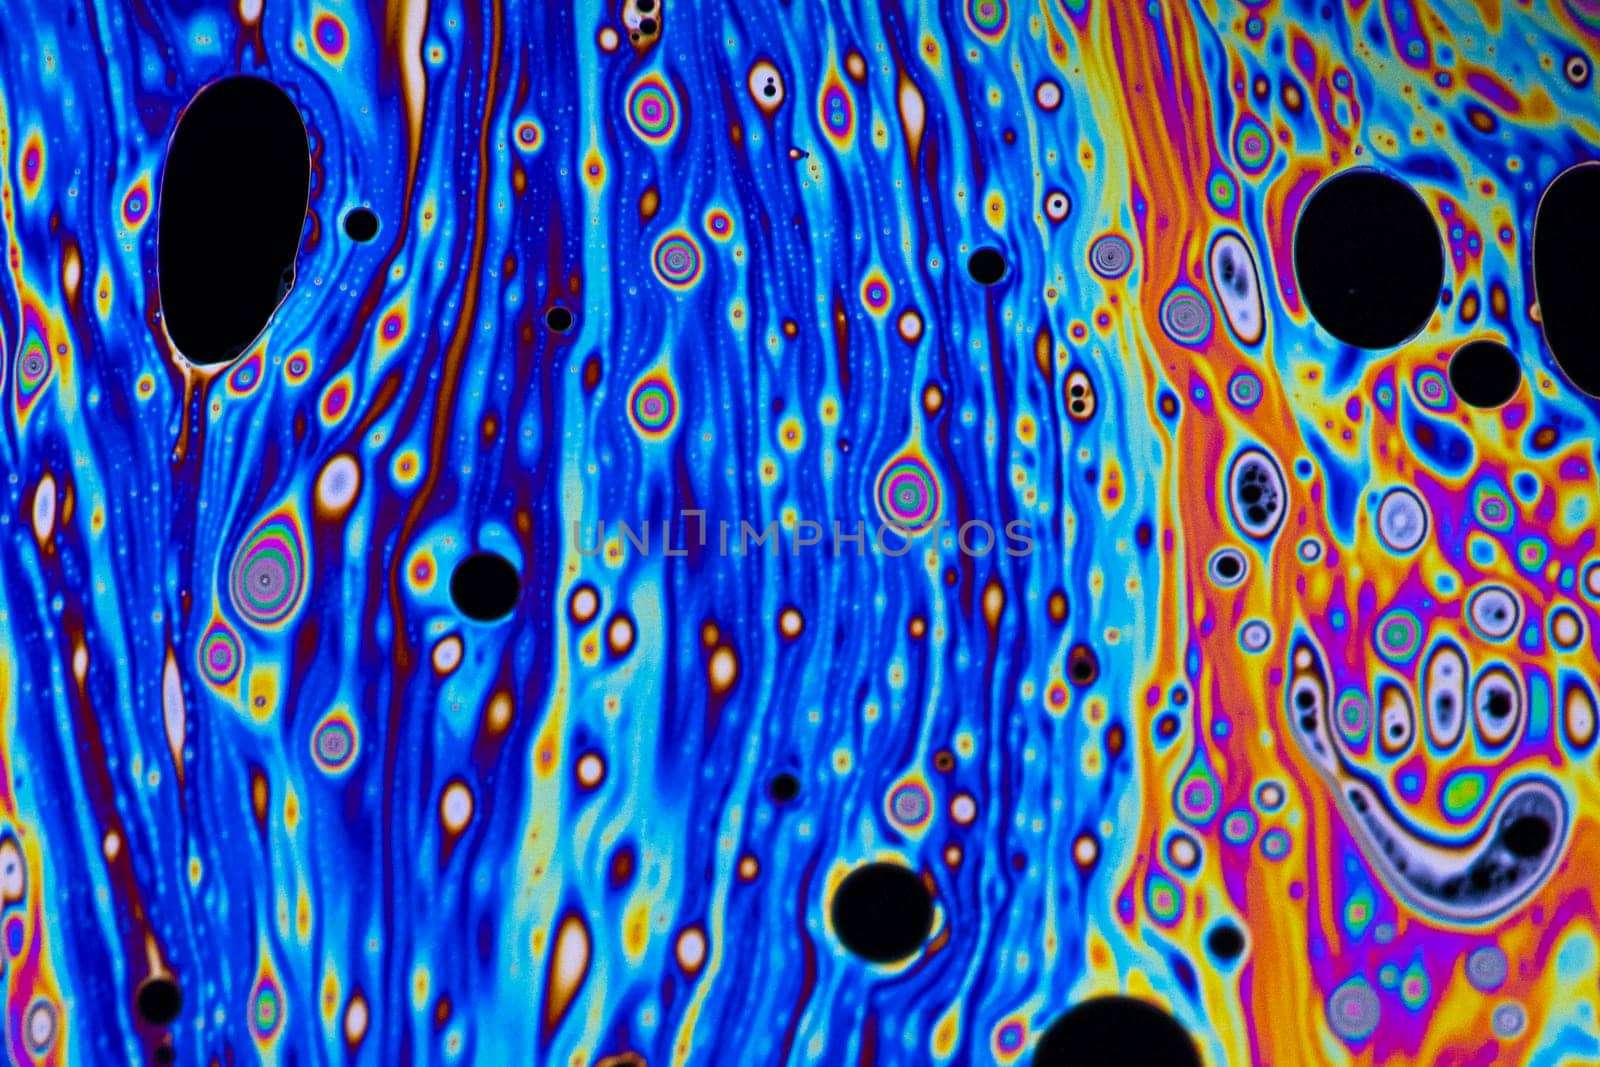 Bright blue, pink, purple, and orange pastel colours swirl around intense black and white dots patterns on the surface of a soap bubble.